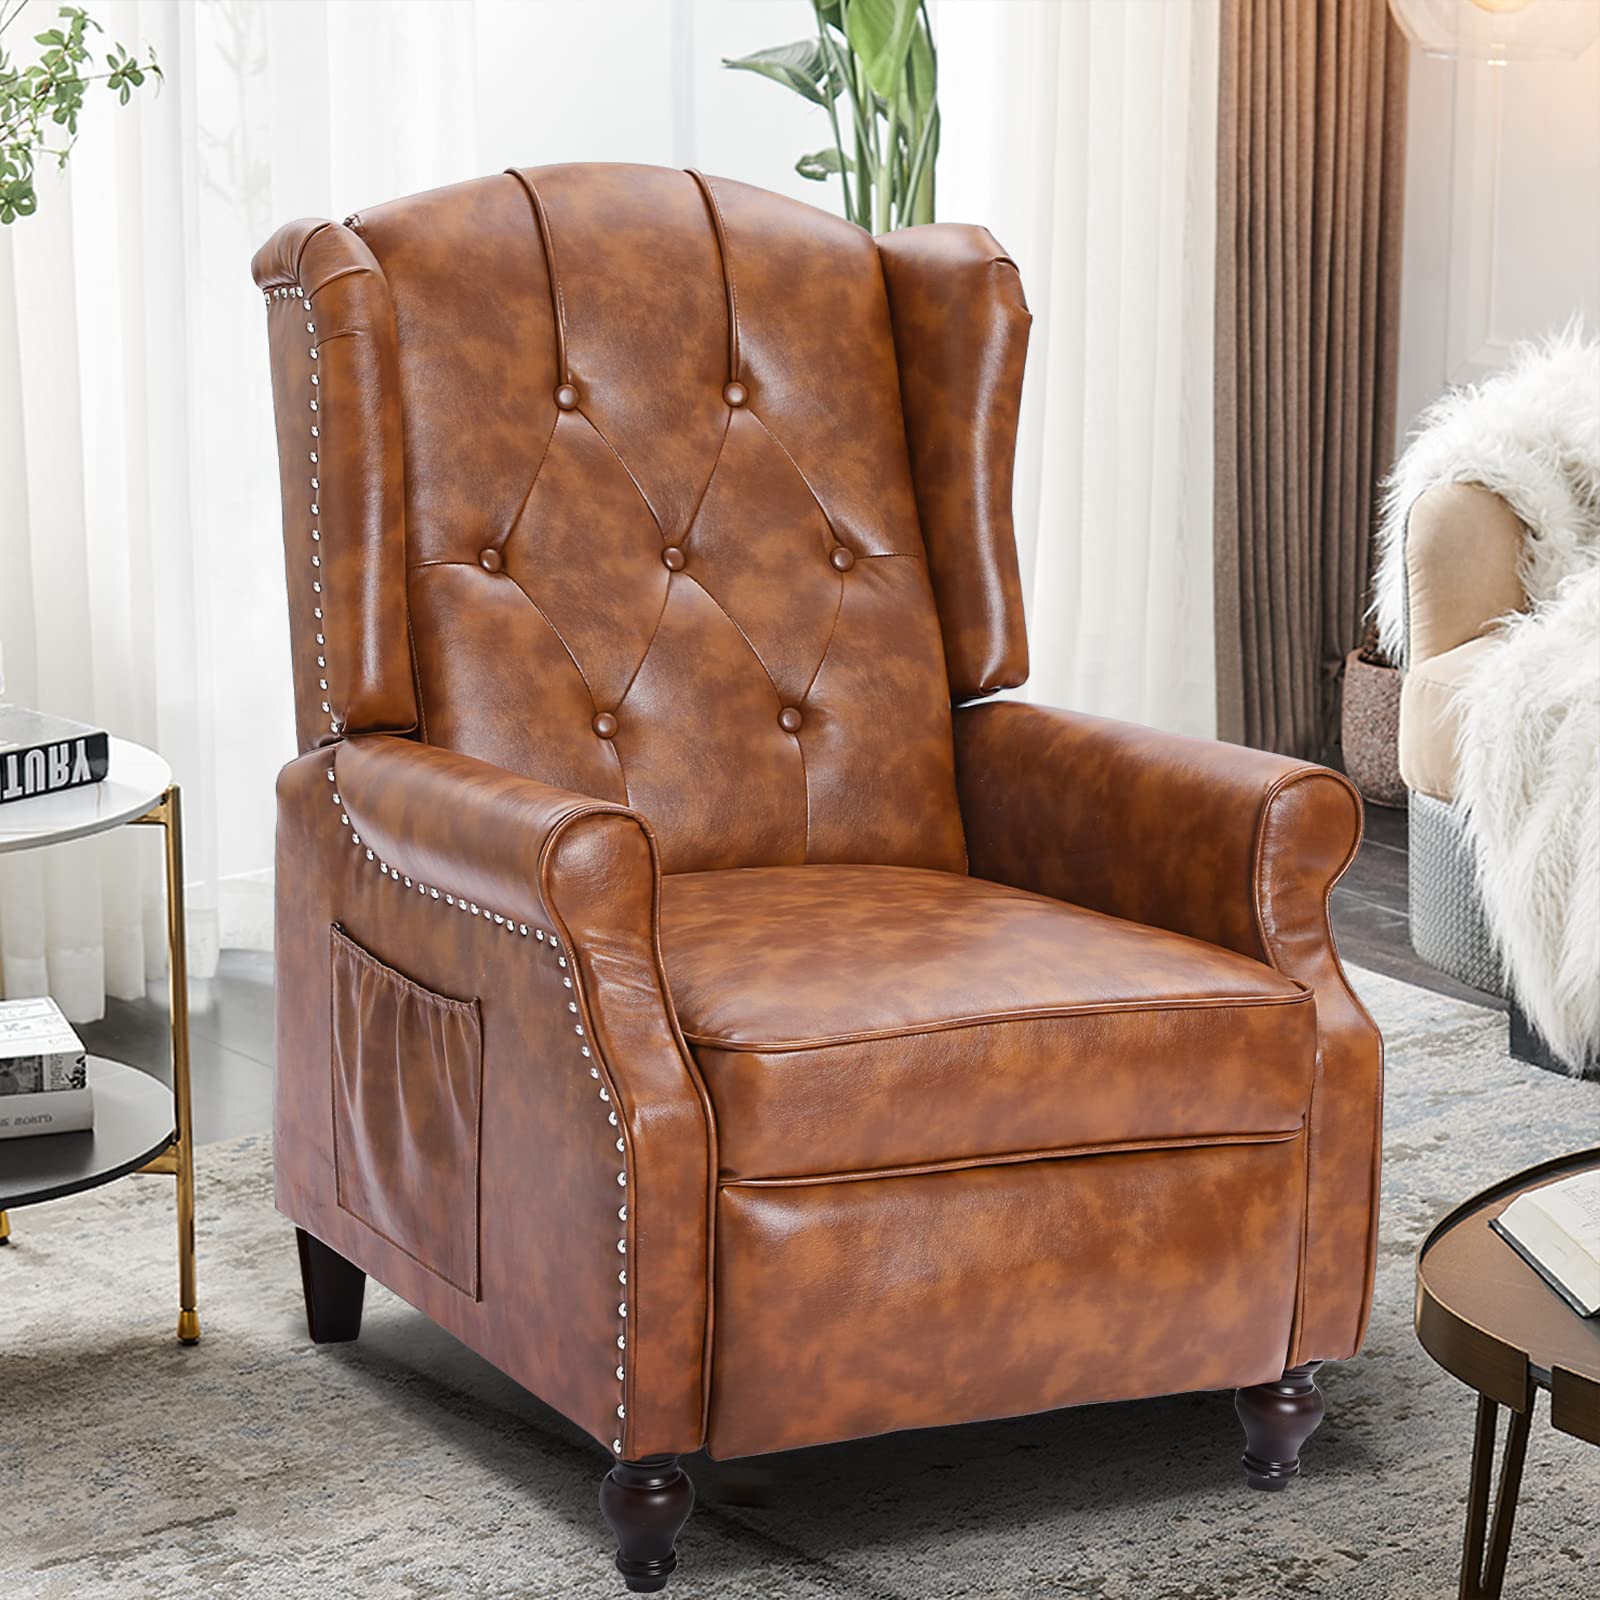 consofa Wingback Recliner chair with Massage and Heat Tufted PU Leather Push Back Arm chair for Living Room Vintage Recliner cha